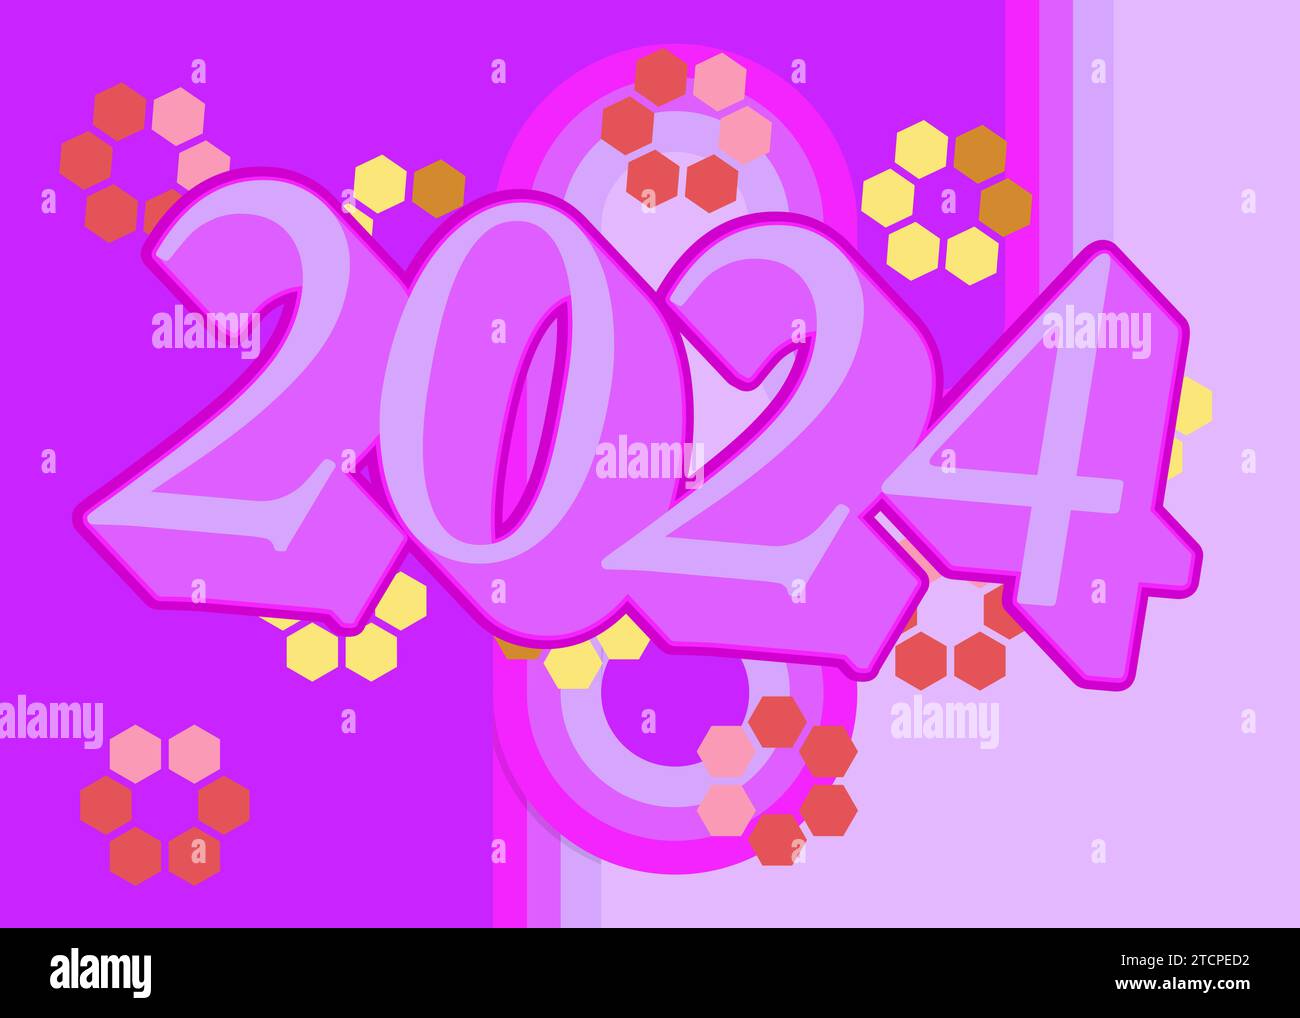 Retro 70s Background With The Number 2024 Groovy Holiday 1970s Art Template Minimalistic Vintage Design Poster Old Fashioned Color Artwork 2TCPED2 